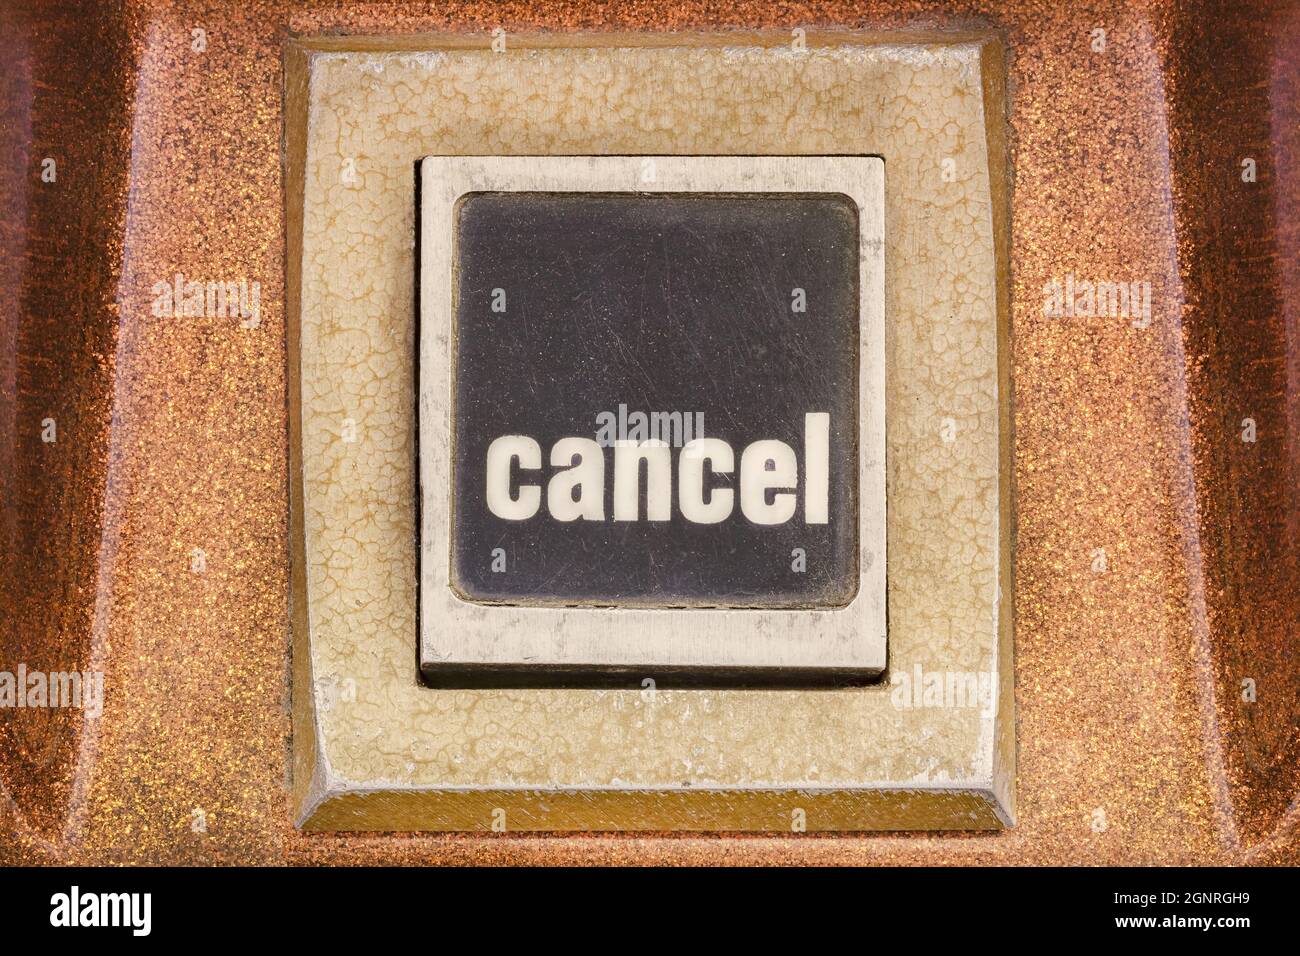 Retro styled image of a cancel push button on a vintage arcade game machine Stock Photo